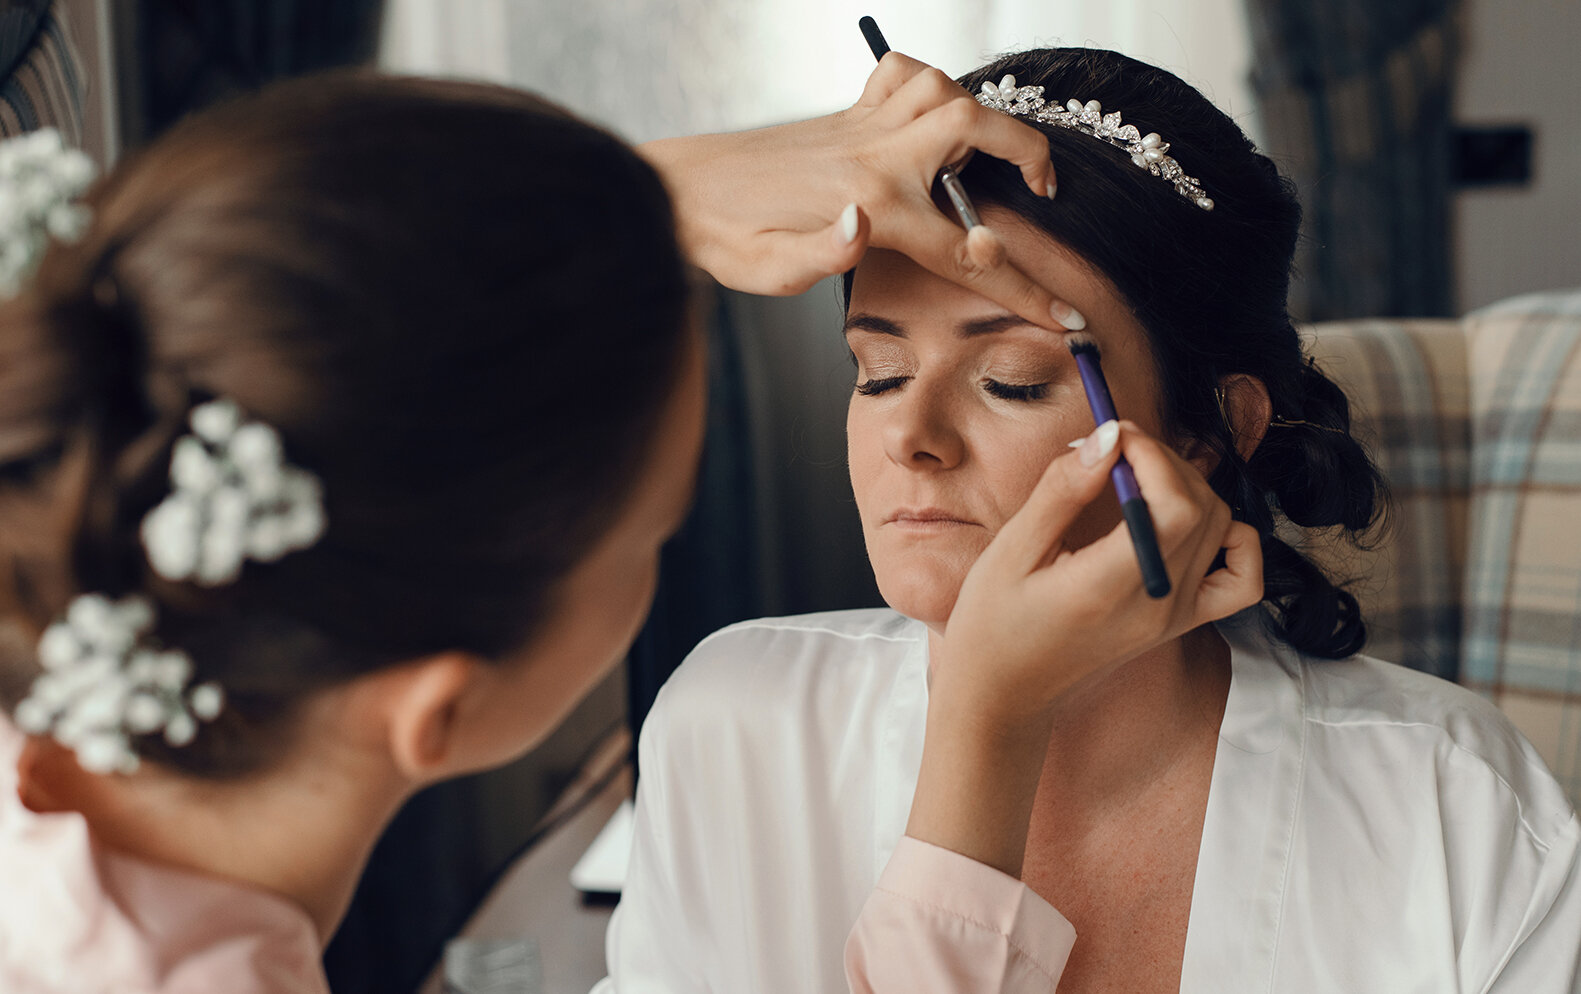 The bride having her makeup done